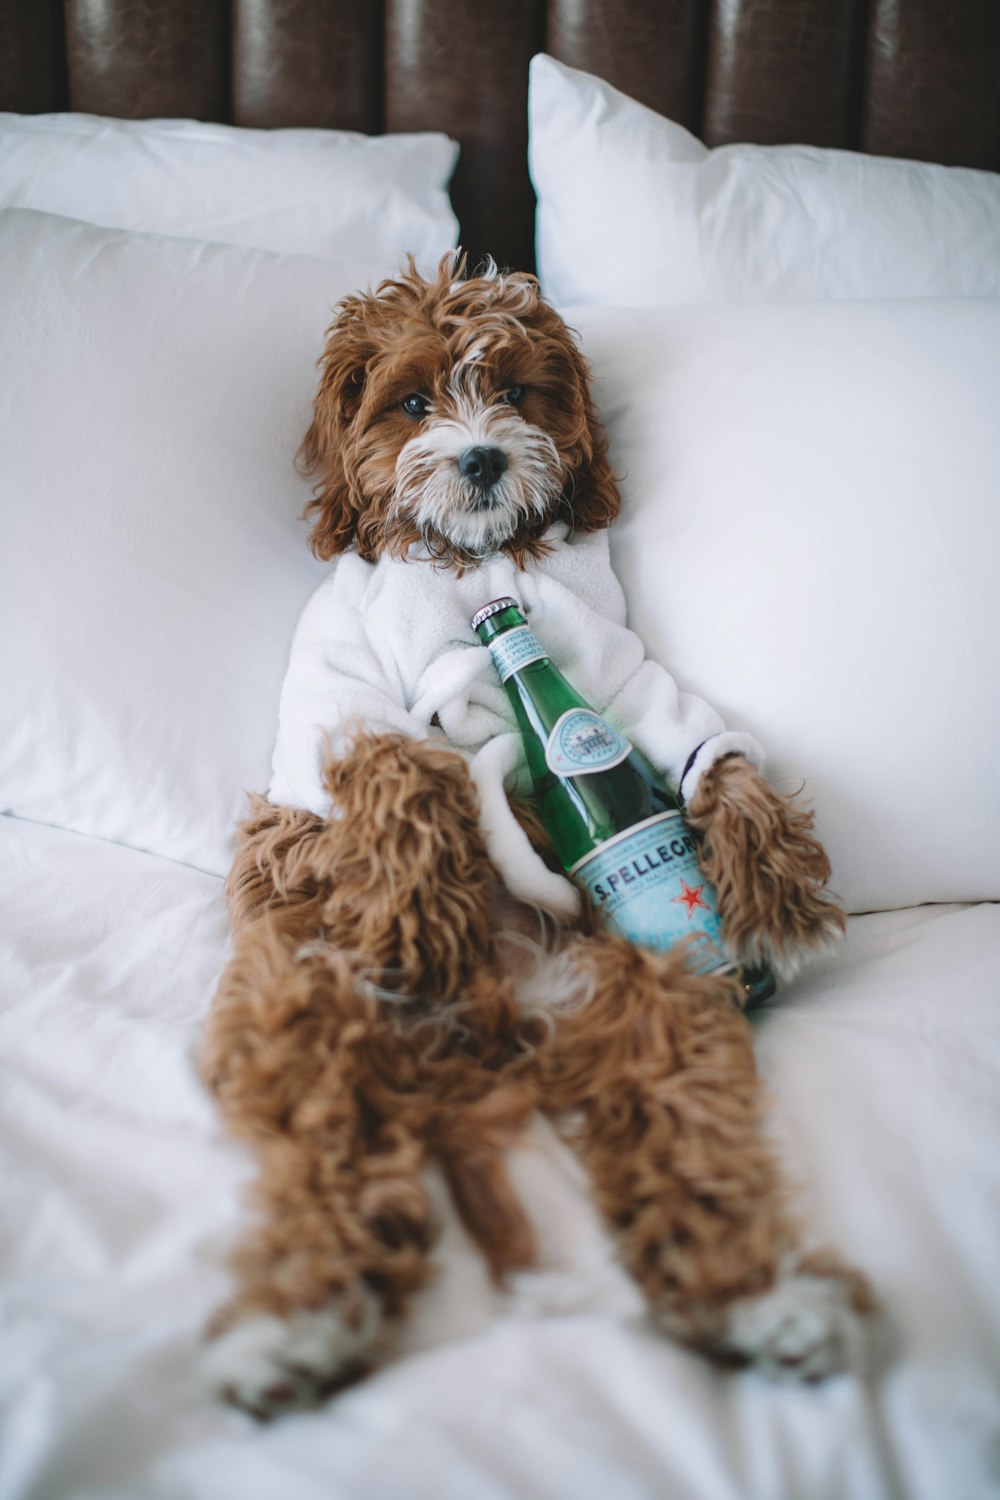 brown dog lying on bed with bottle of S. Pellegrino sparkling water